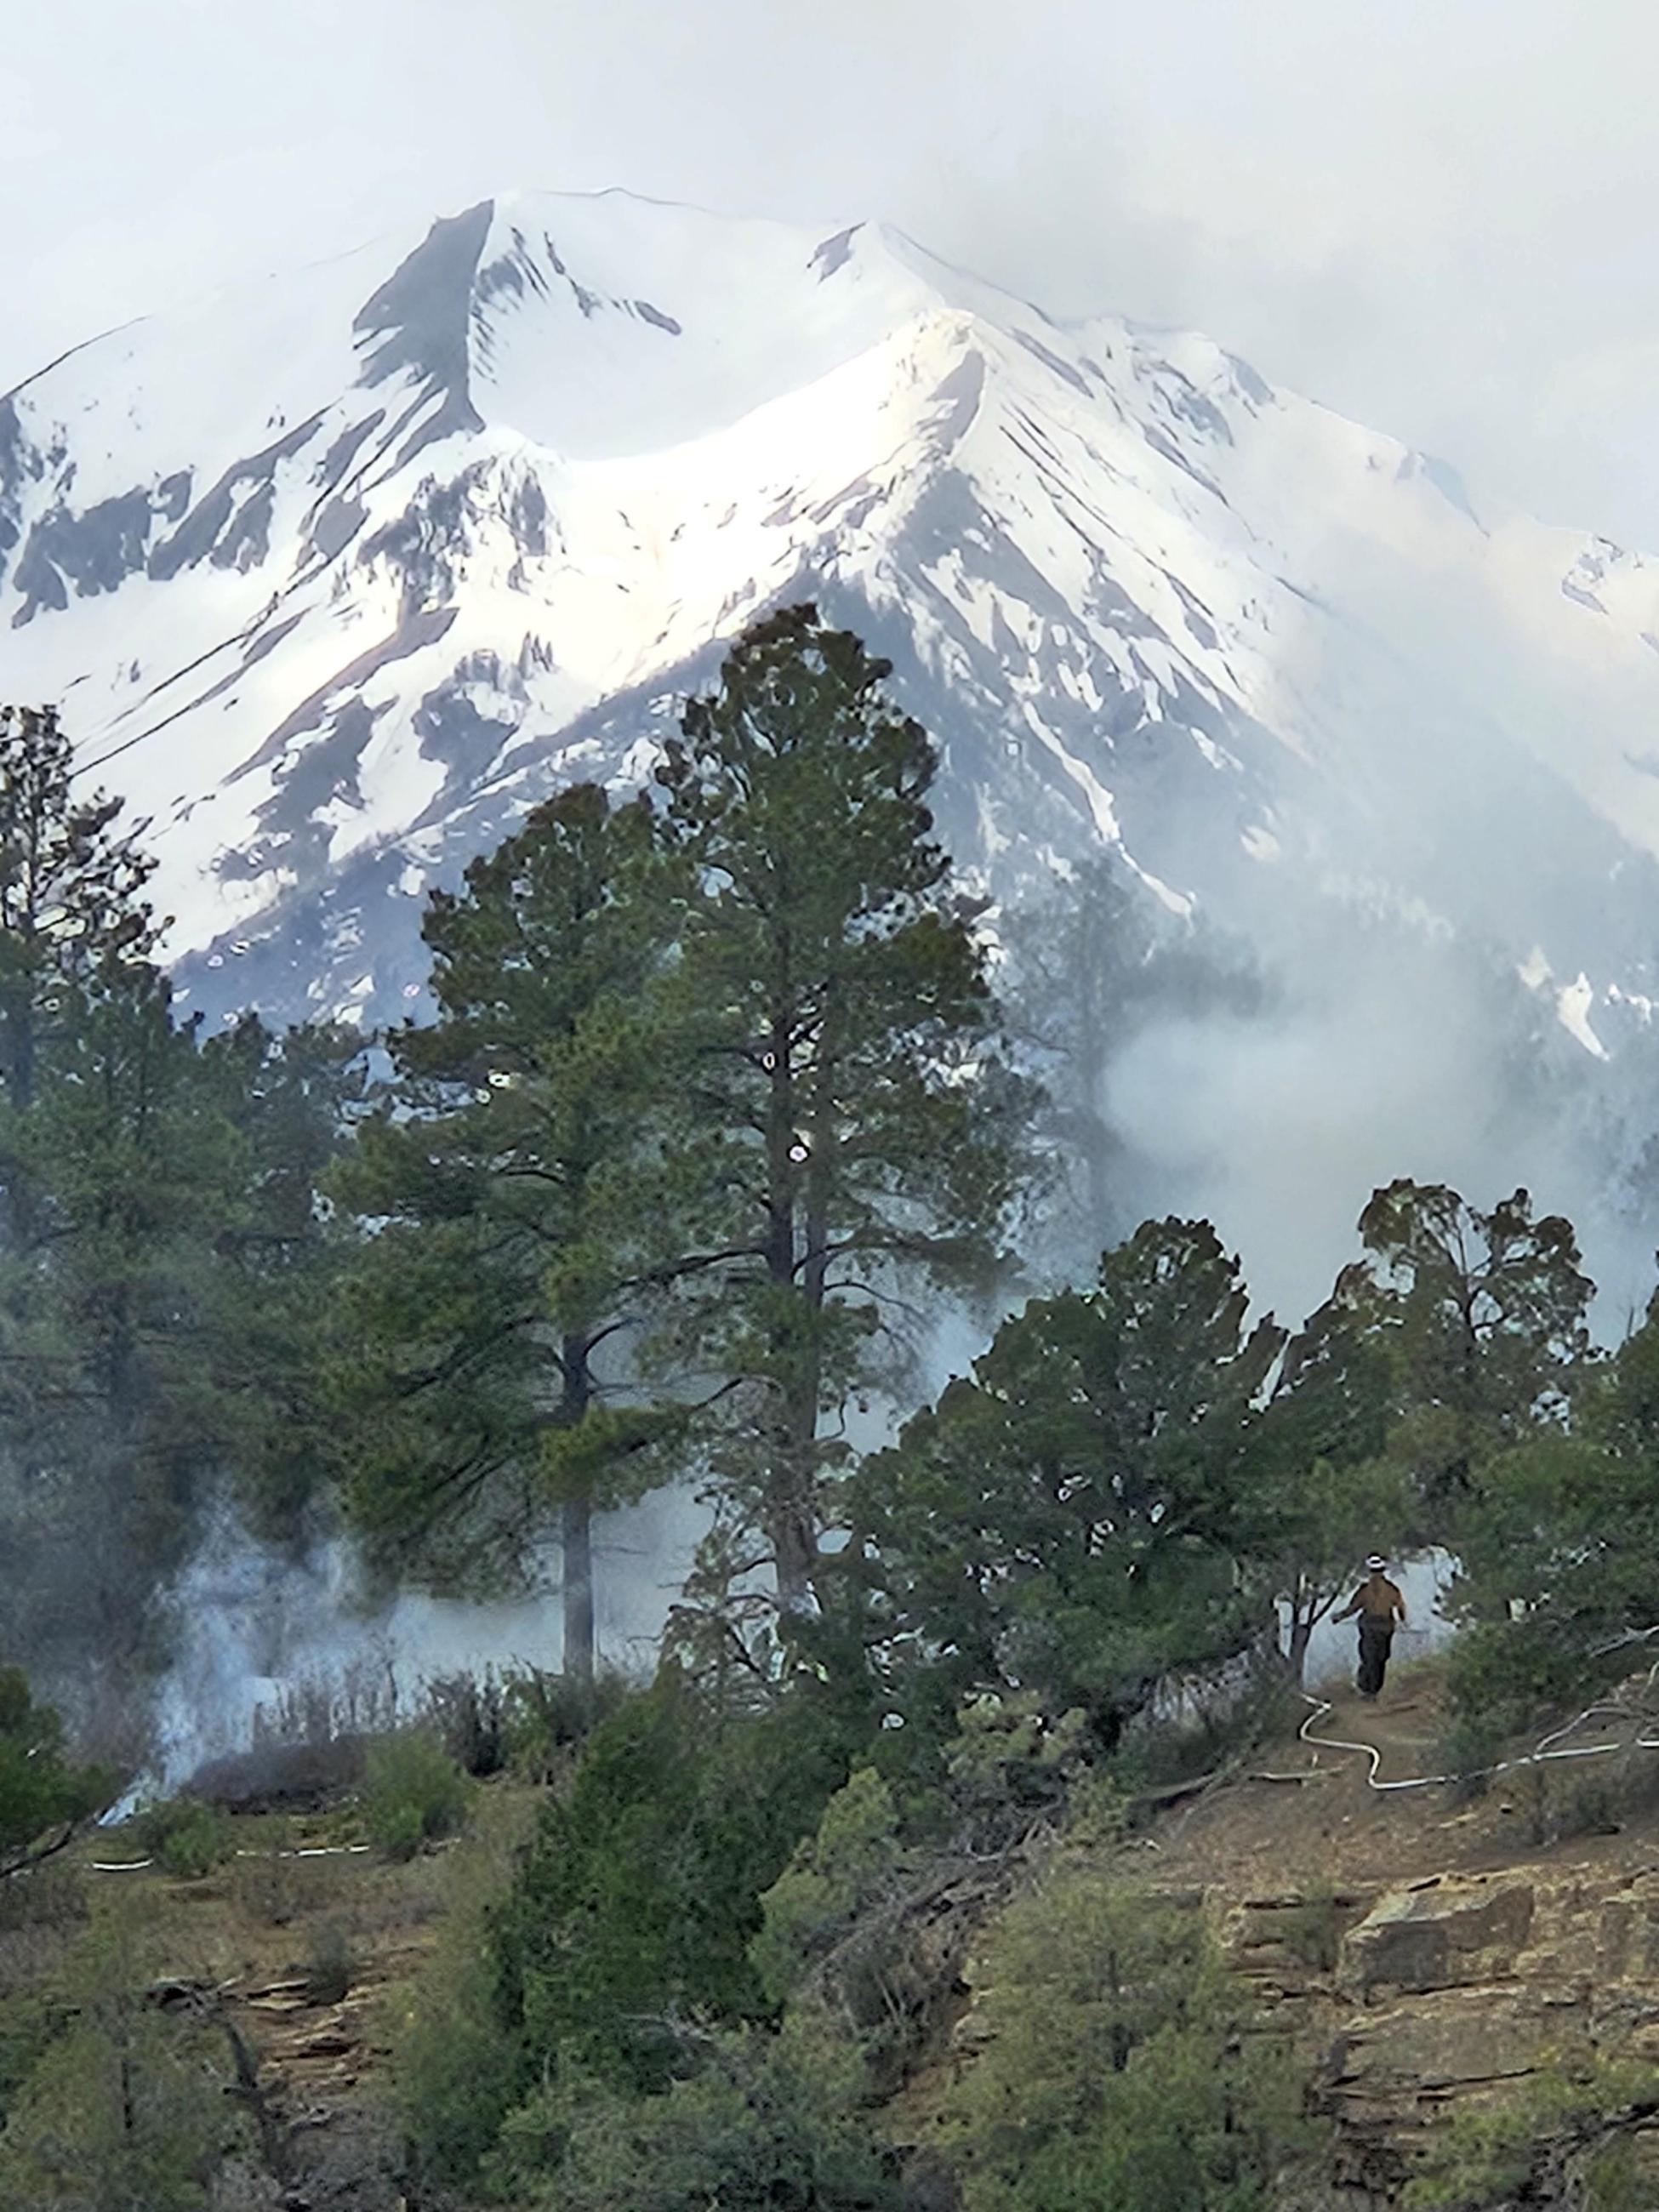 Image of firefighter walking along trail on Animas City Mountain Prescribed Burn. Image has Ponderosa pine trees, Juniper and Pinyon trees, smoke, rock, brush, fire hose and very large snow capped mountain in the background. 